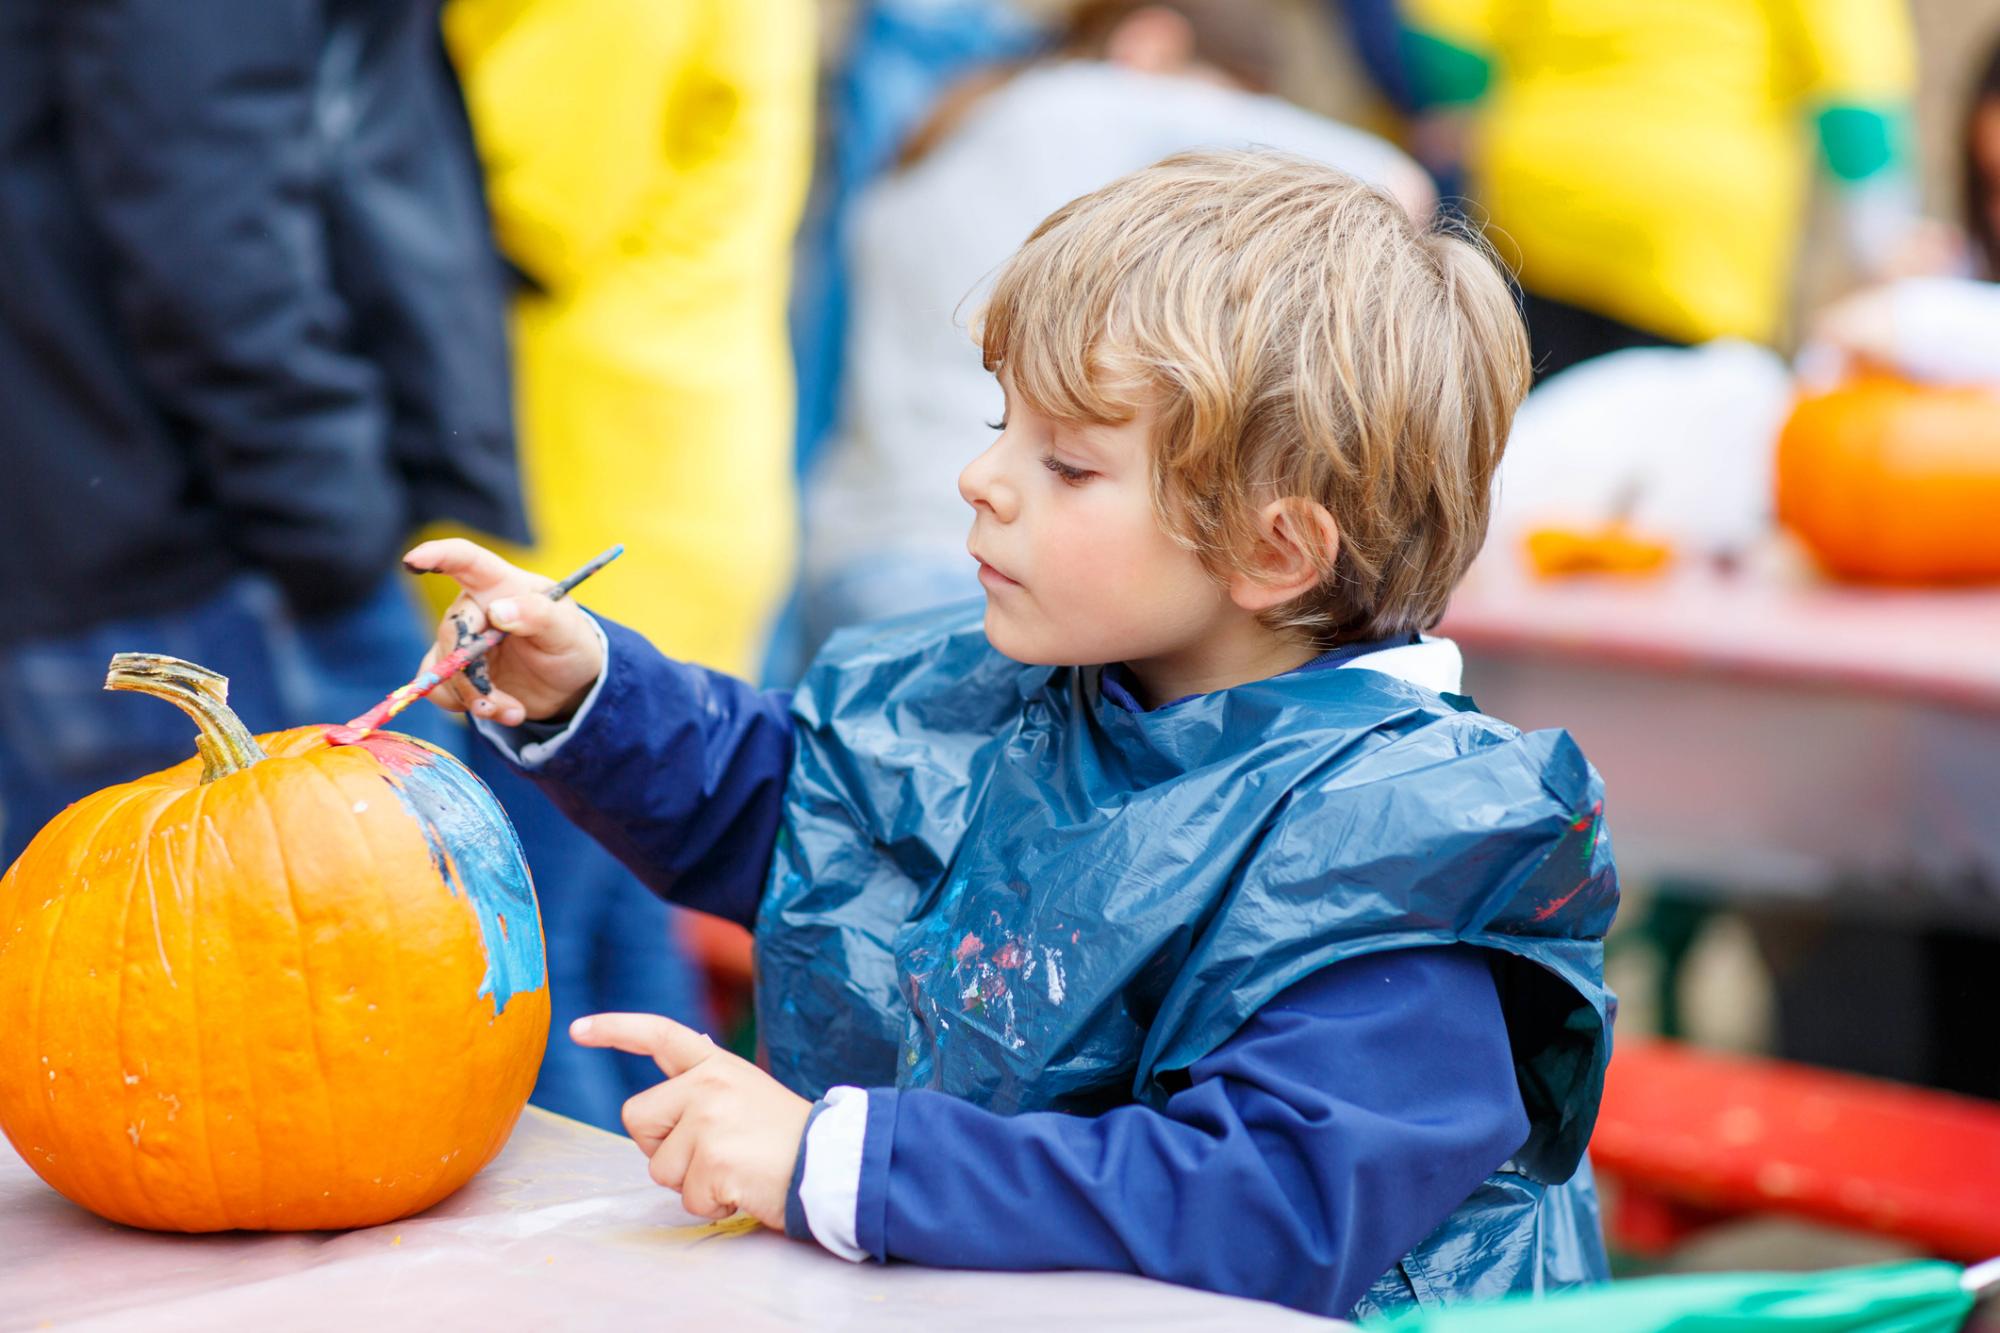 5 Fun Fall Activities to Build On Your Child's Imagination | Nature's Path